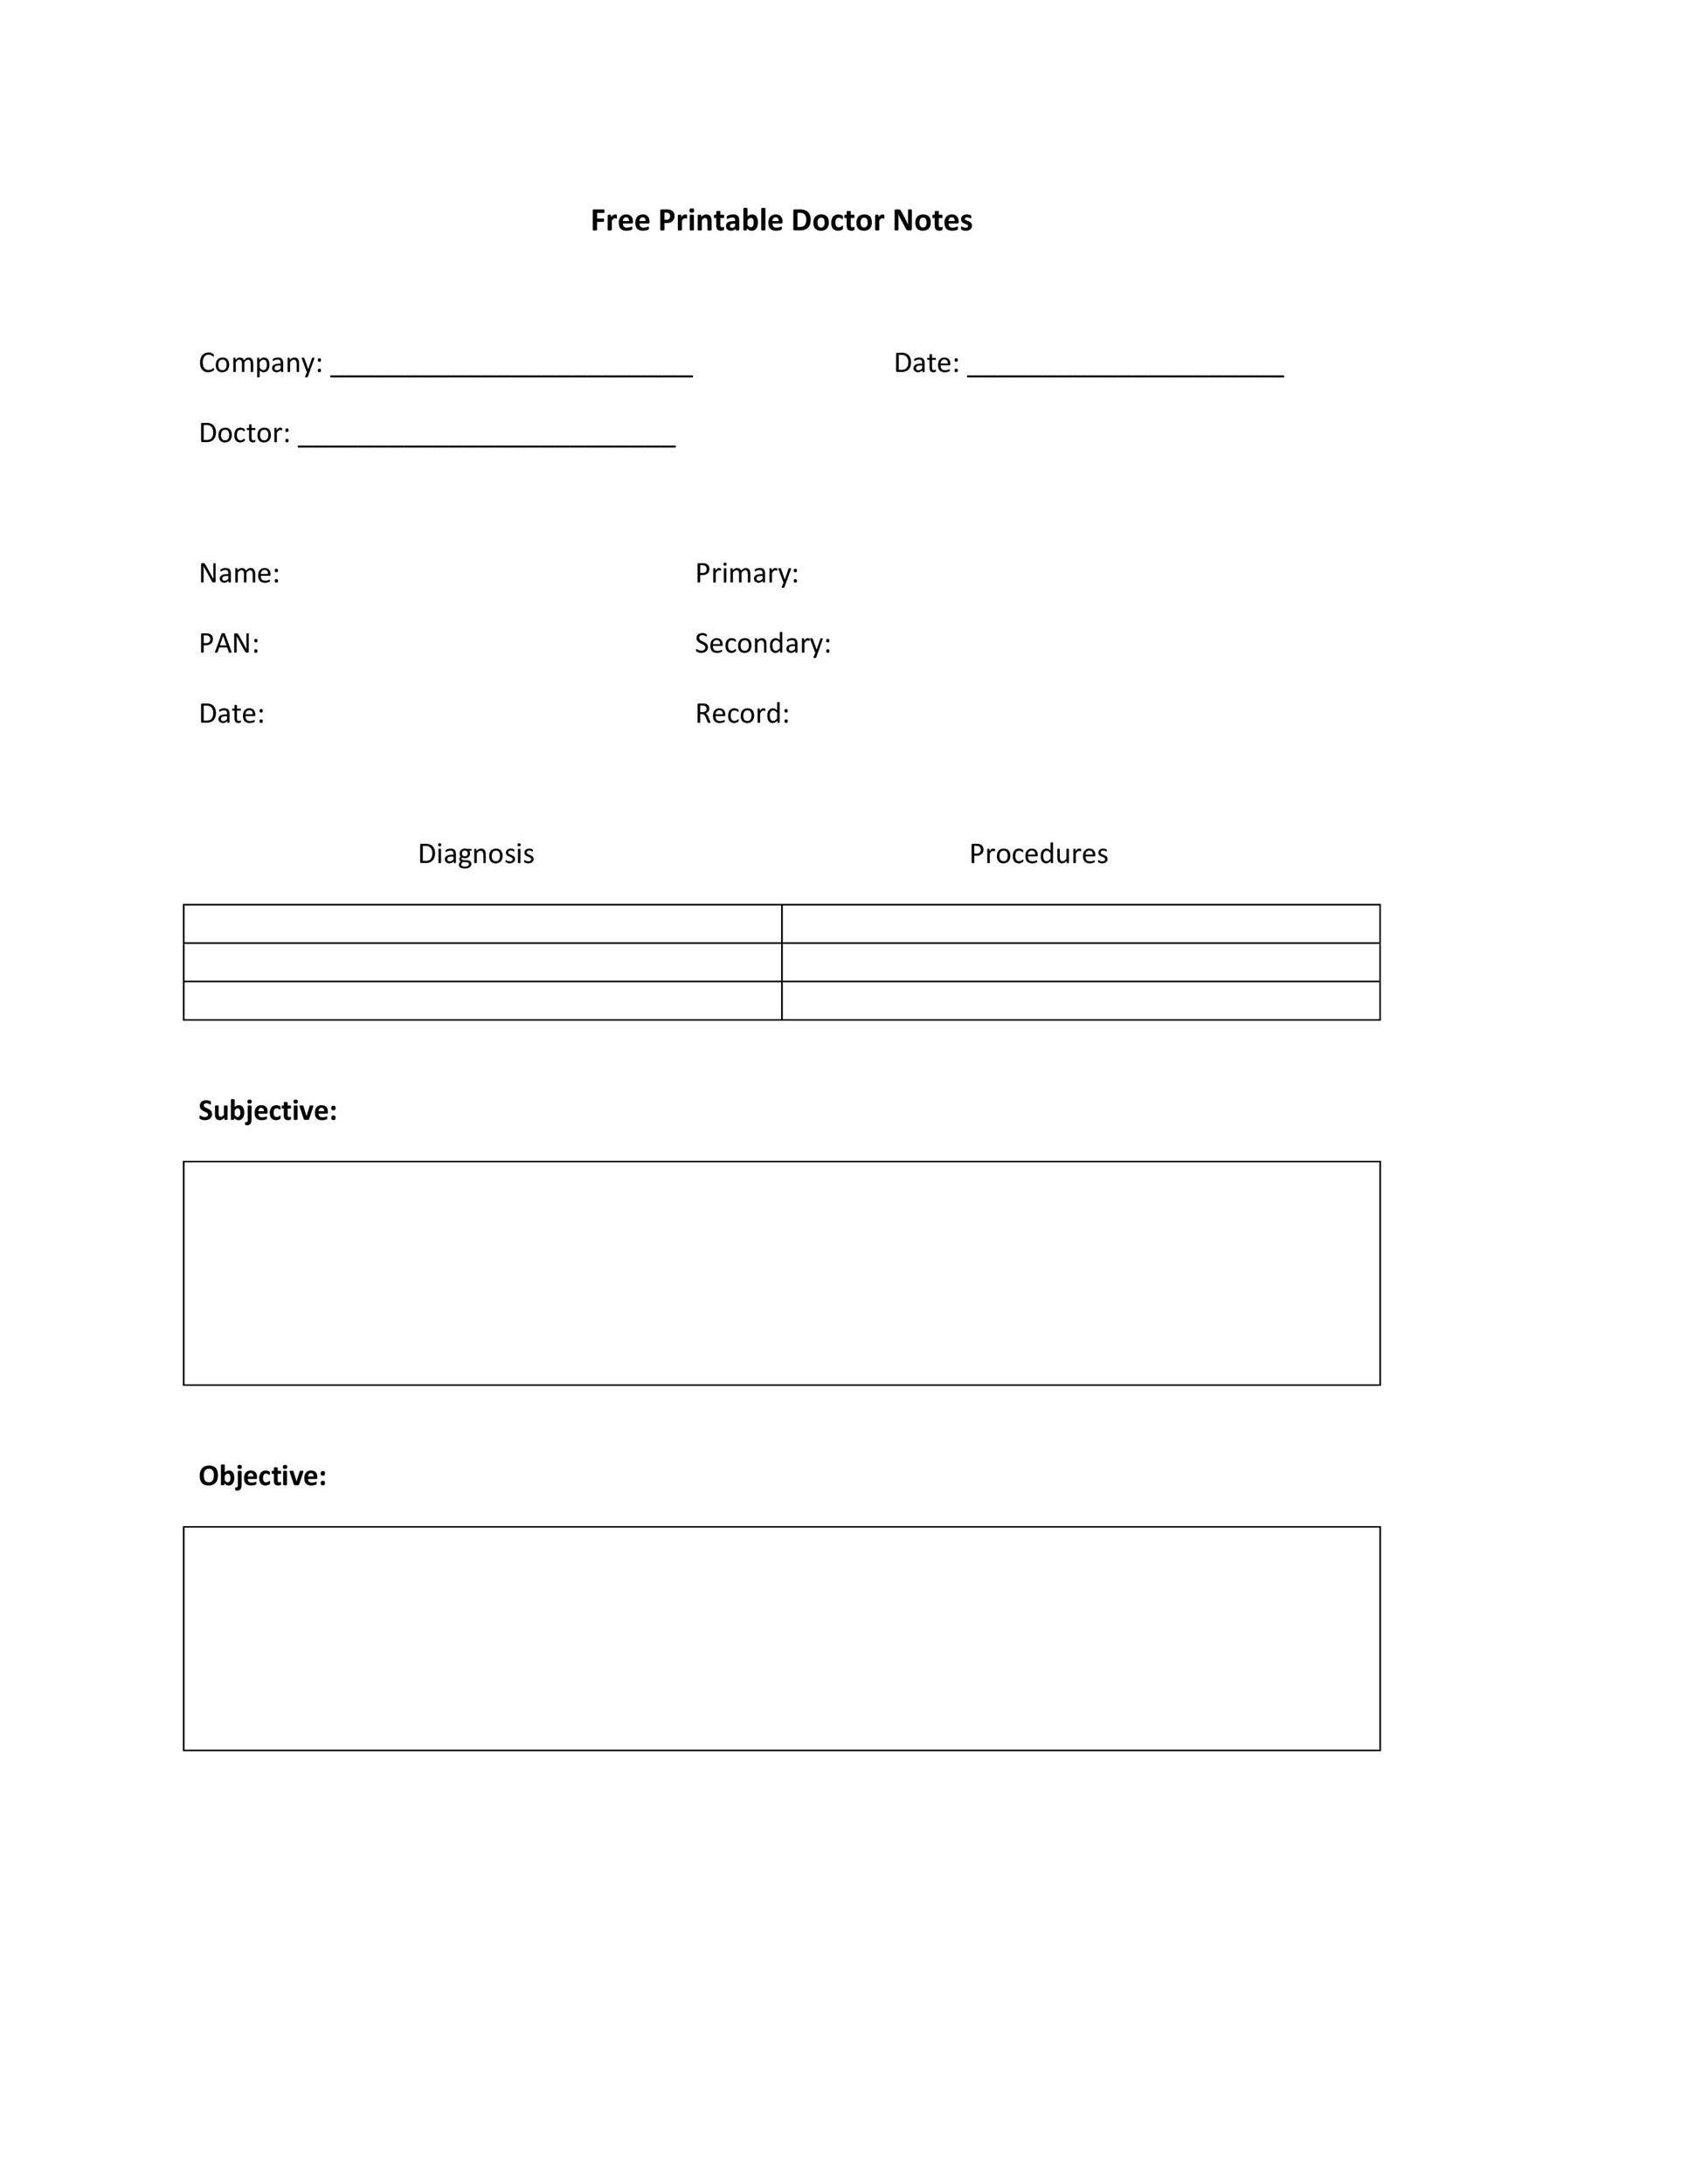 emergency-room-doctor-note-template-tutore-org-master-of-documents